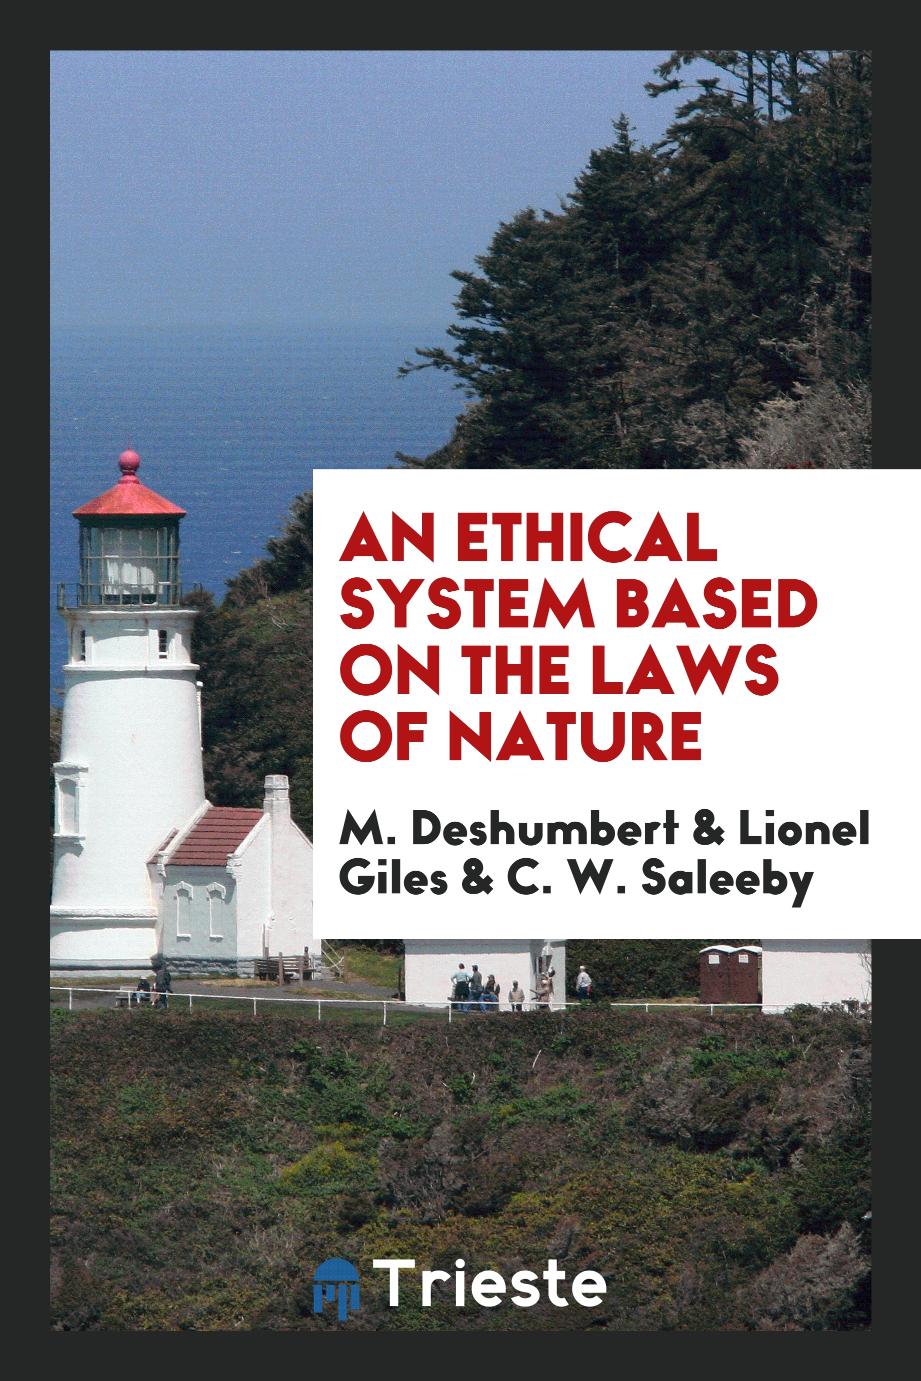 M. Deshumbert, Lionel Giles, C. W. Saleeby - An Ethical System Based on the Laws of Nature